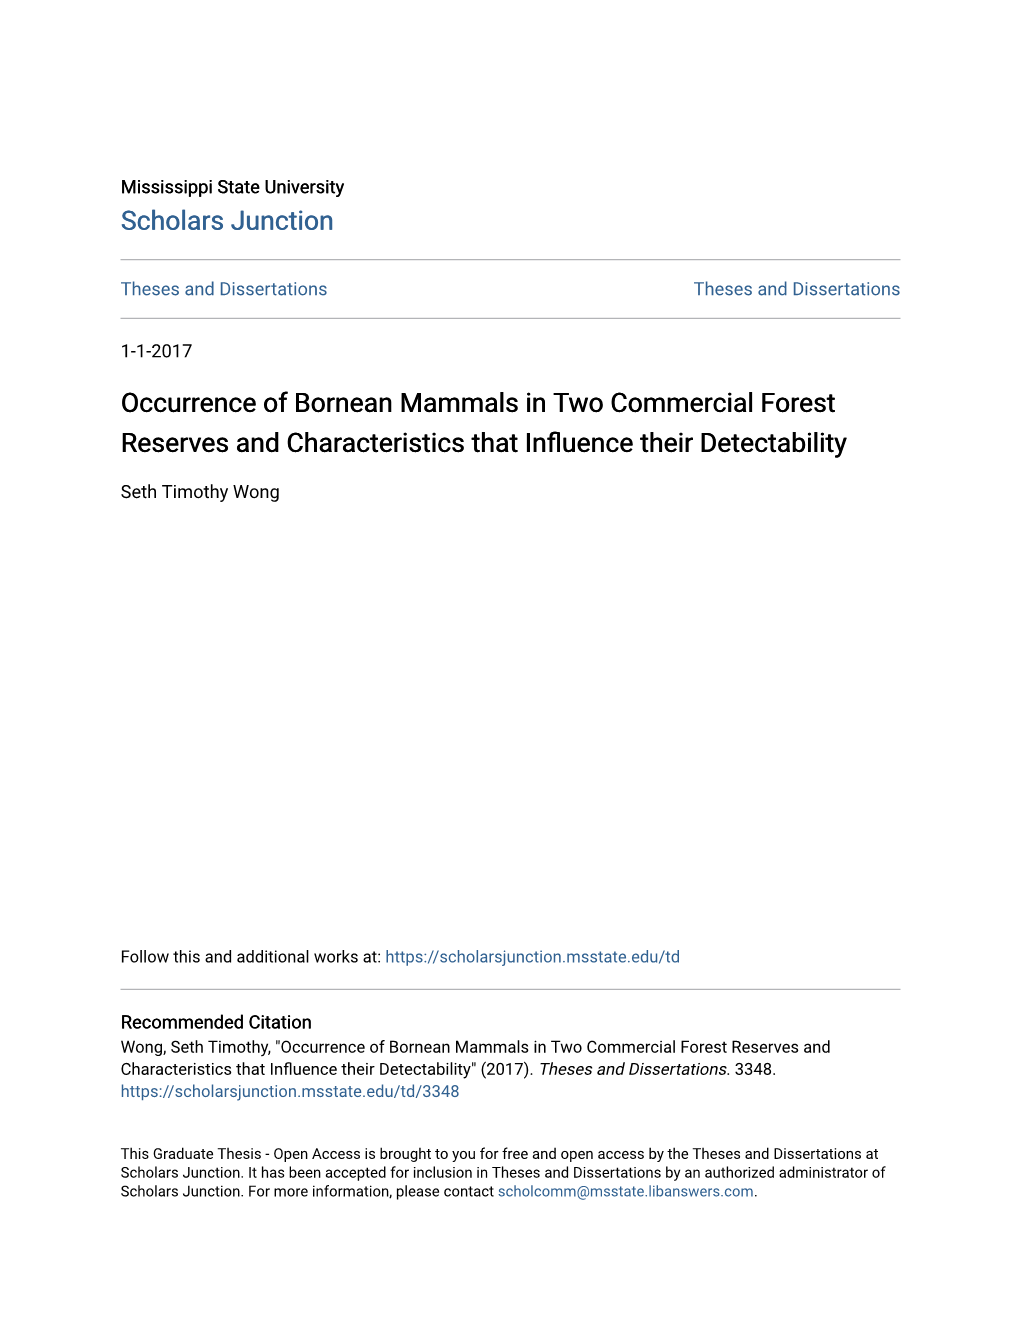 Occurrence of Bornean Mammals in Two Commercial Forest Reserves and Characteristics That Influence Their Detectability